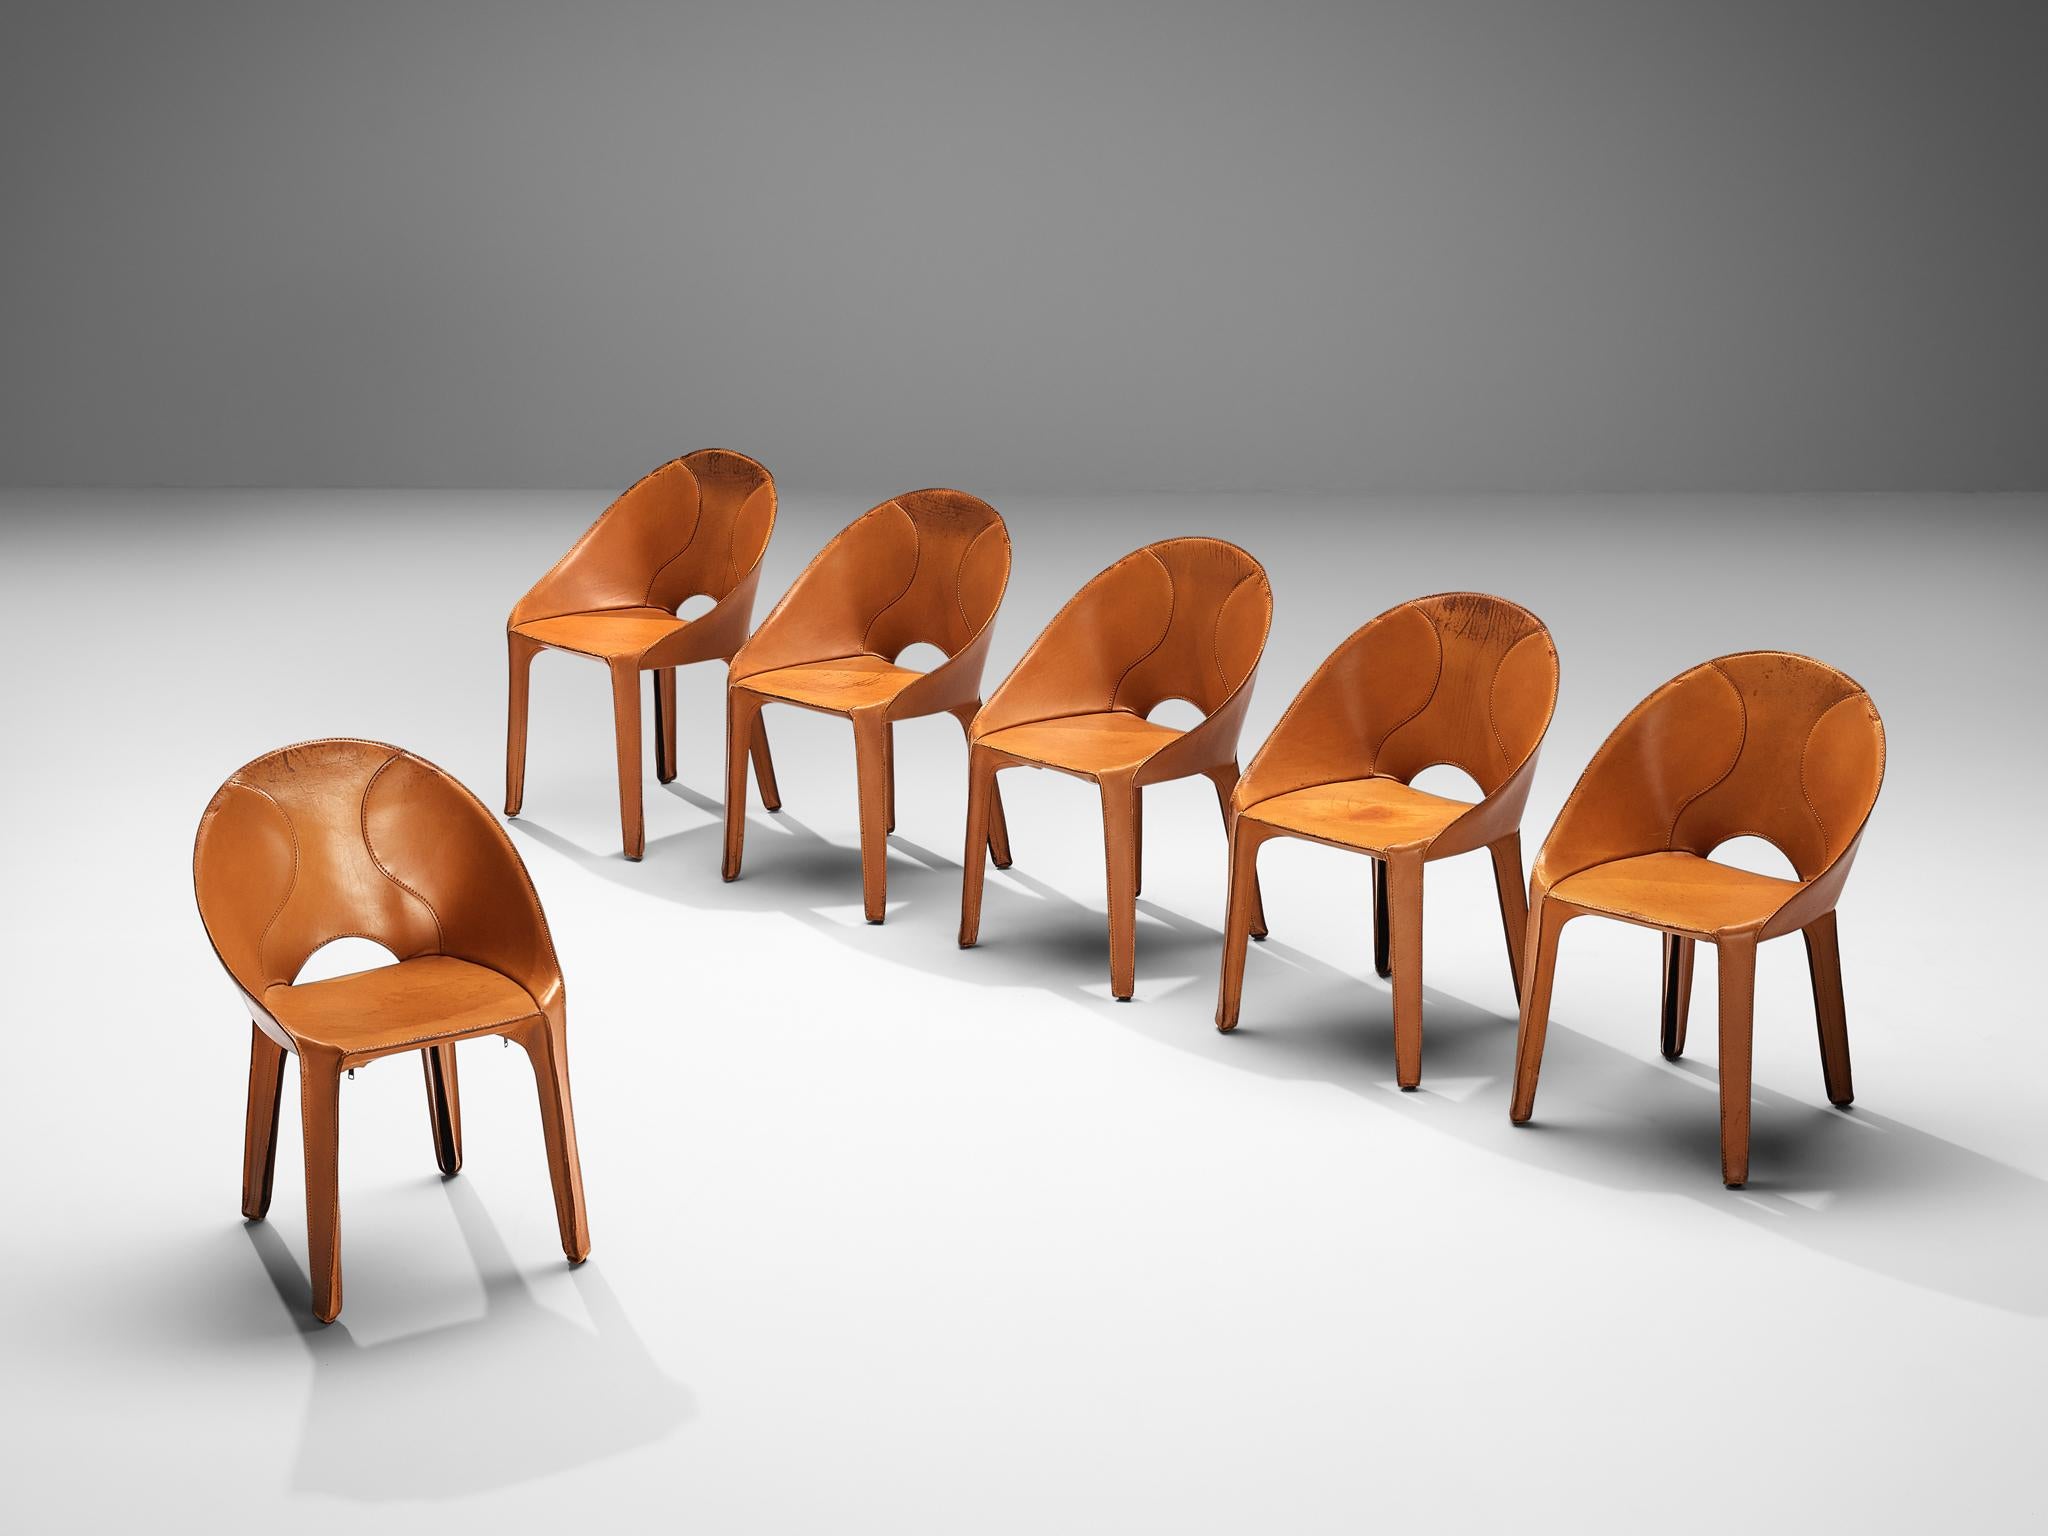 Mario Bellini for Cassina, set of six ‘Lira e Liuto’ dining chairs, cognac leather, Italy, 1989

This set of six ‘Lira e Liuto’ dining chairs has beautiful cognac colored leather that is stitched to the seats of these chairs. The four legs and the